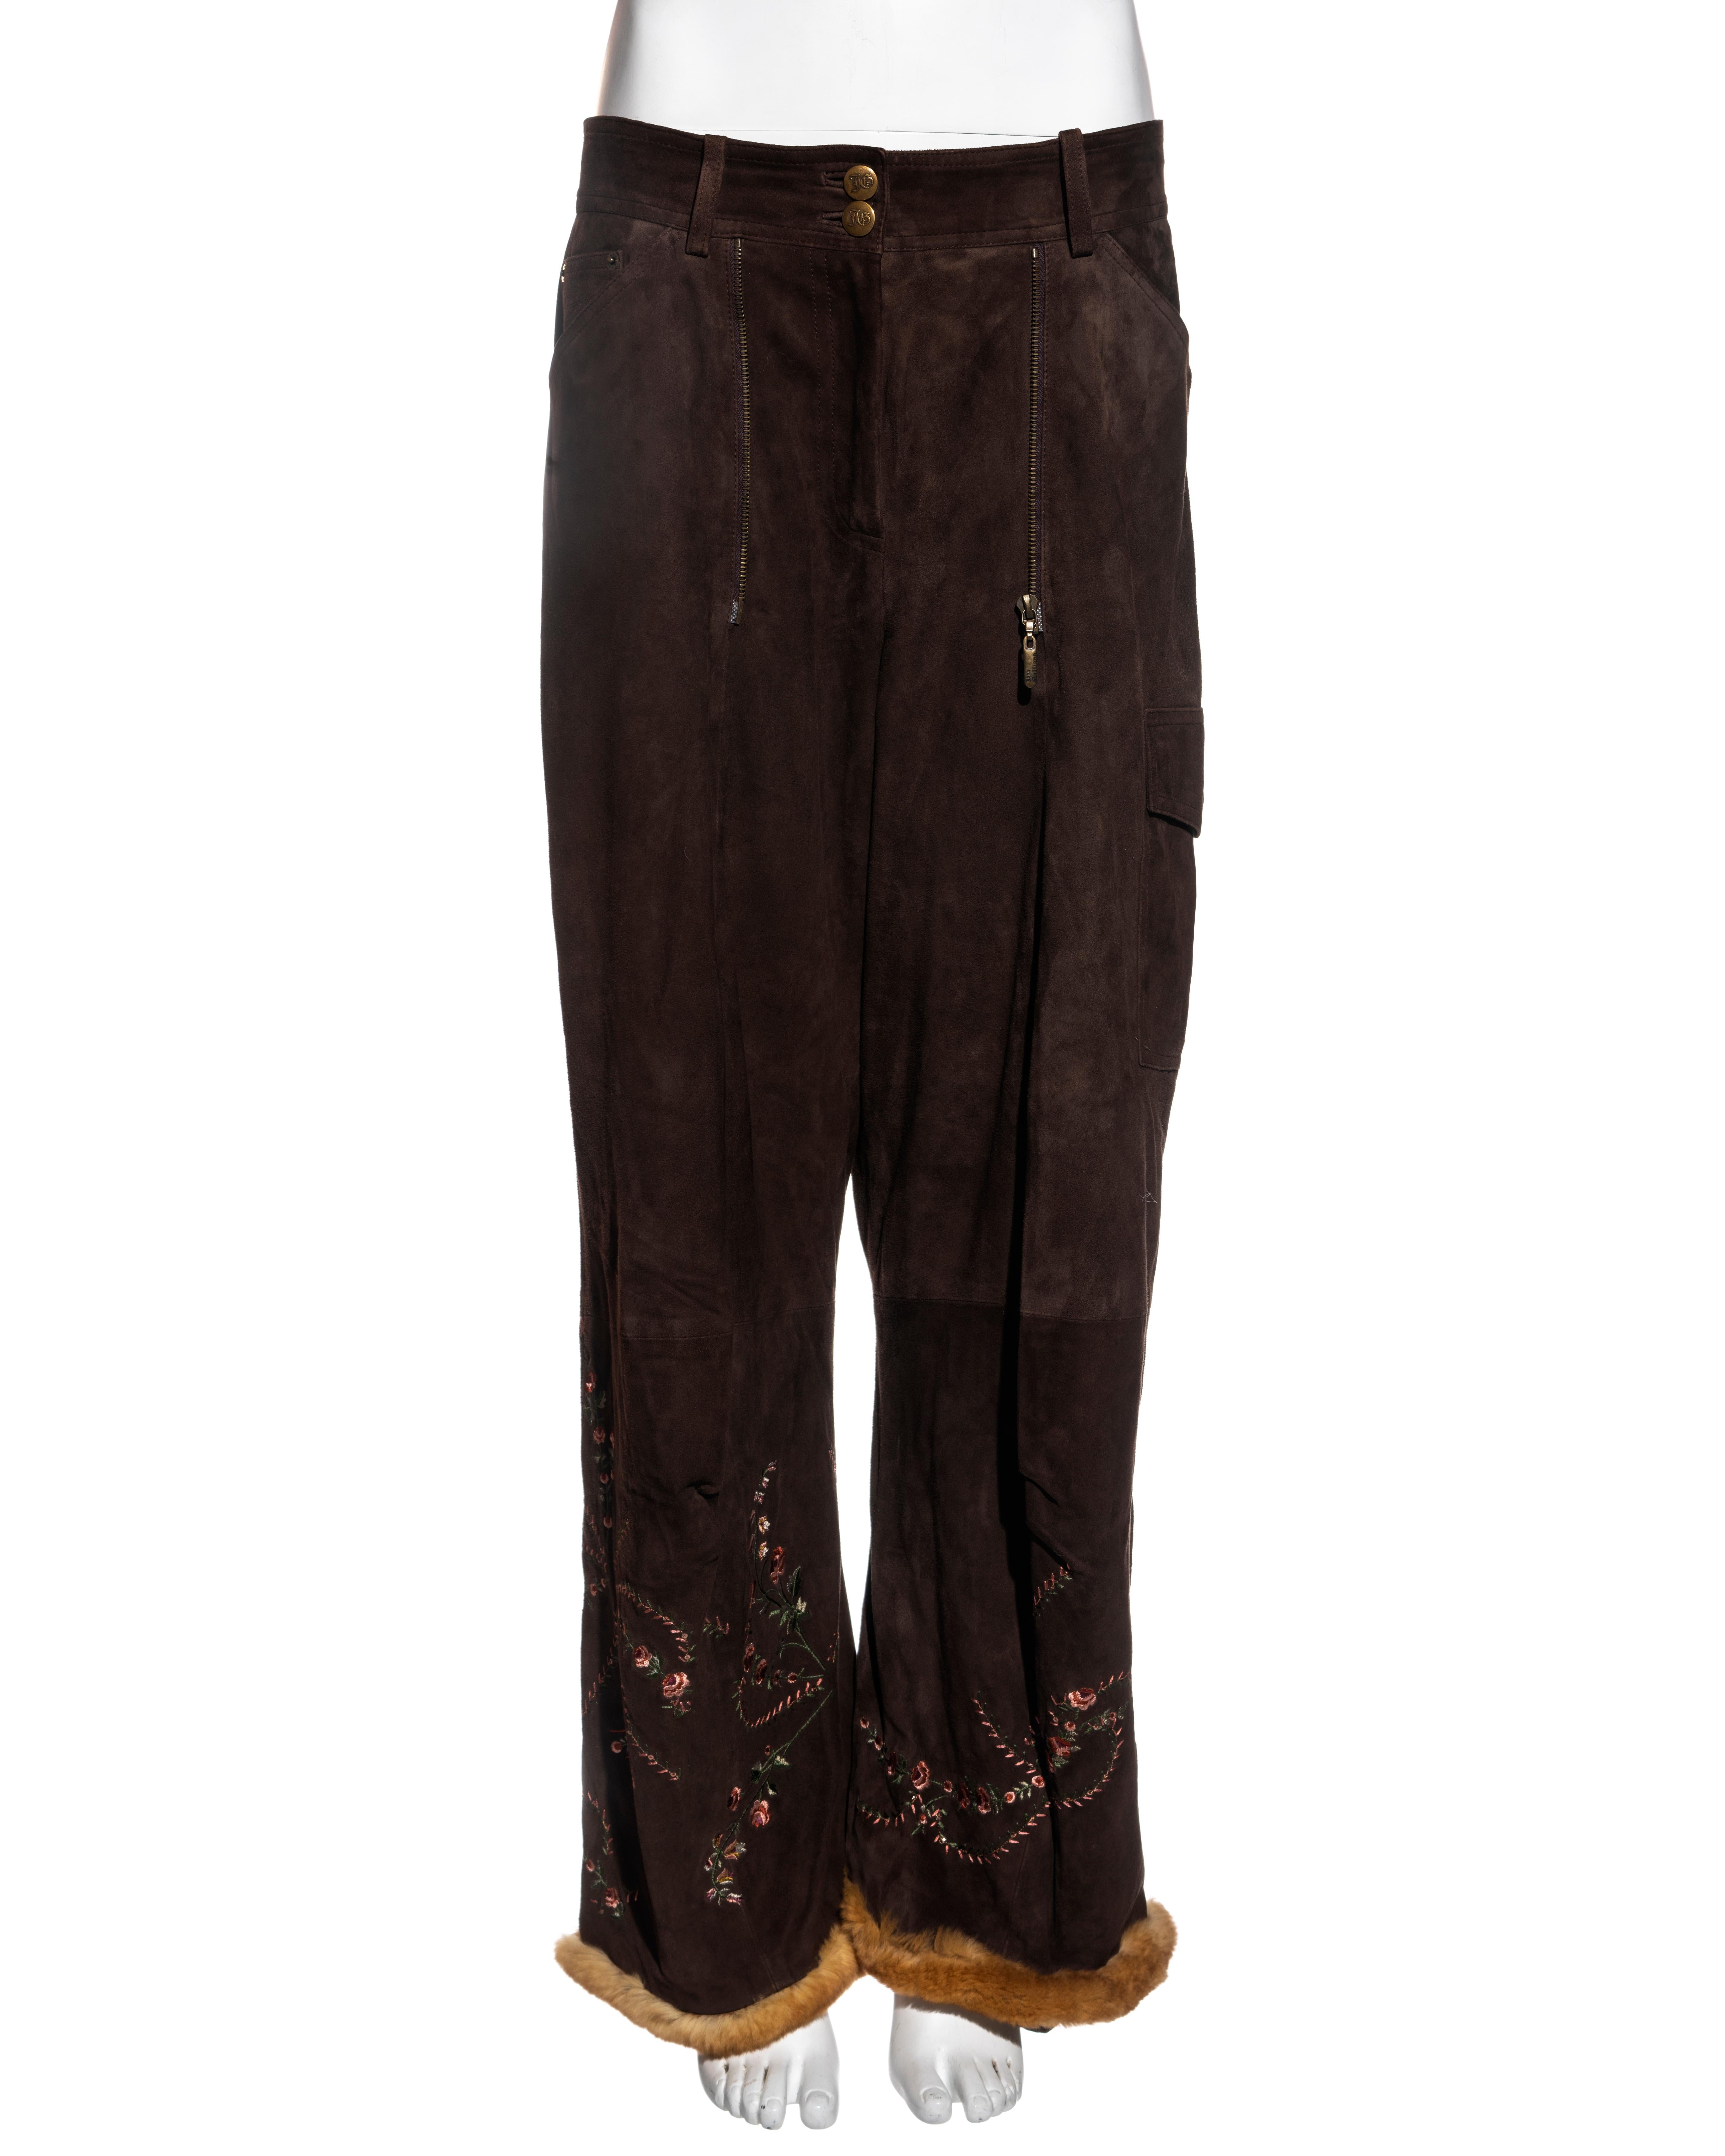 John Galliano brown embroidered suede cargo pants with fur trim, fw 2003 1